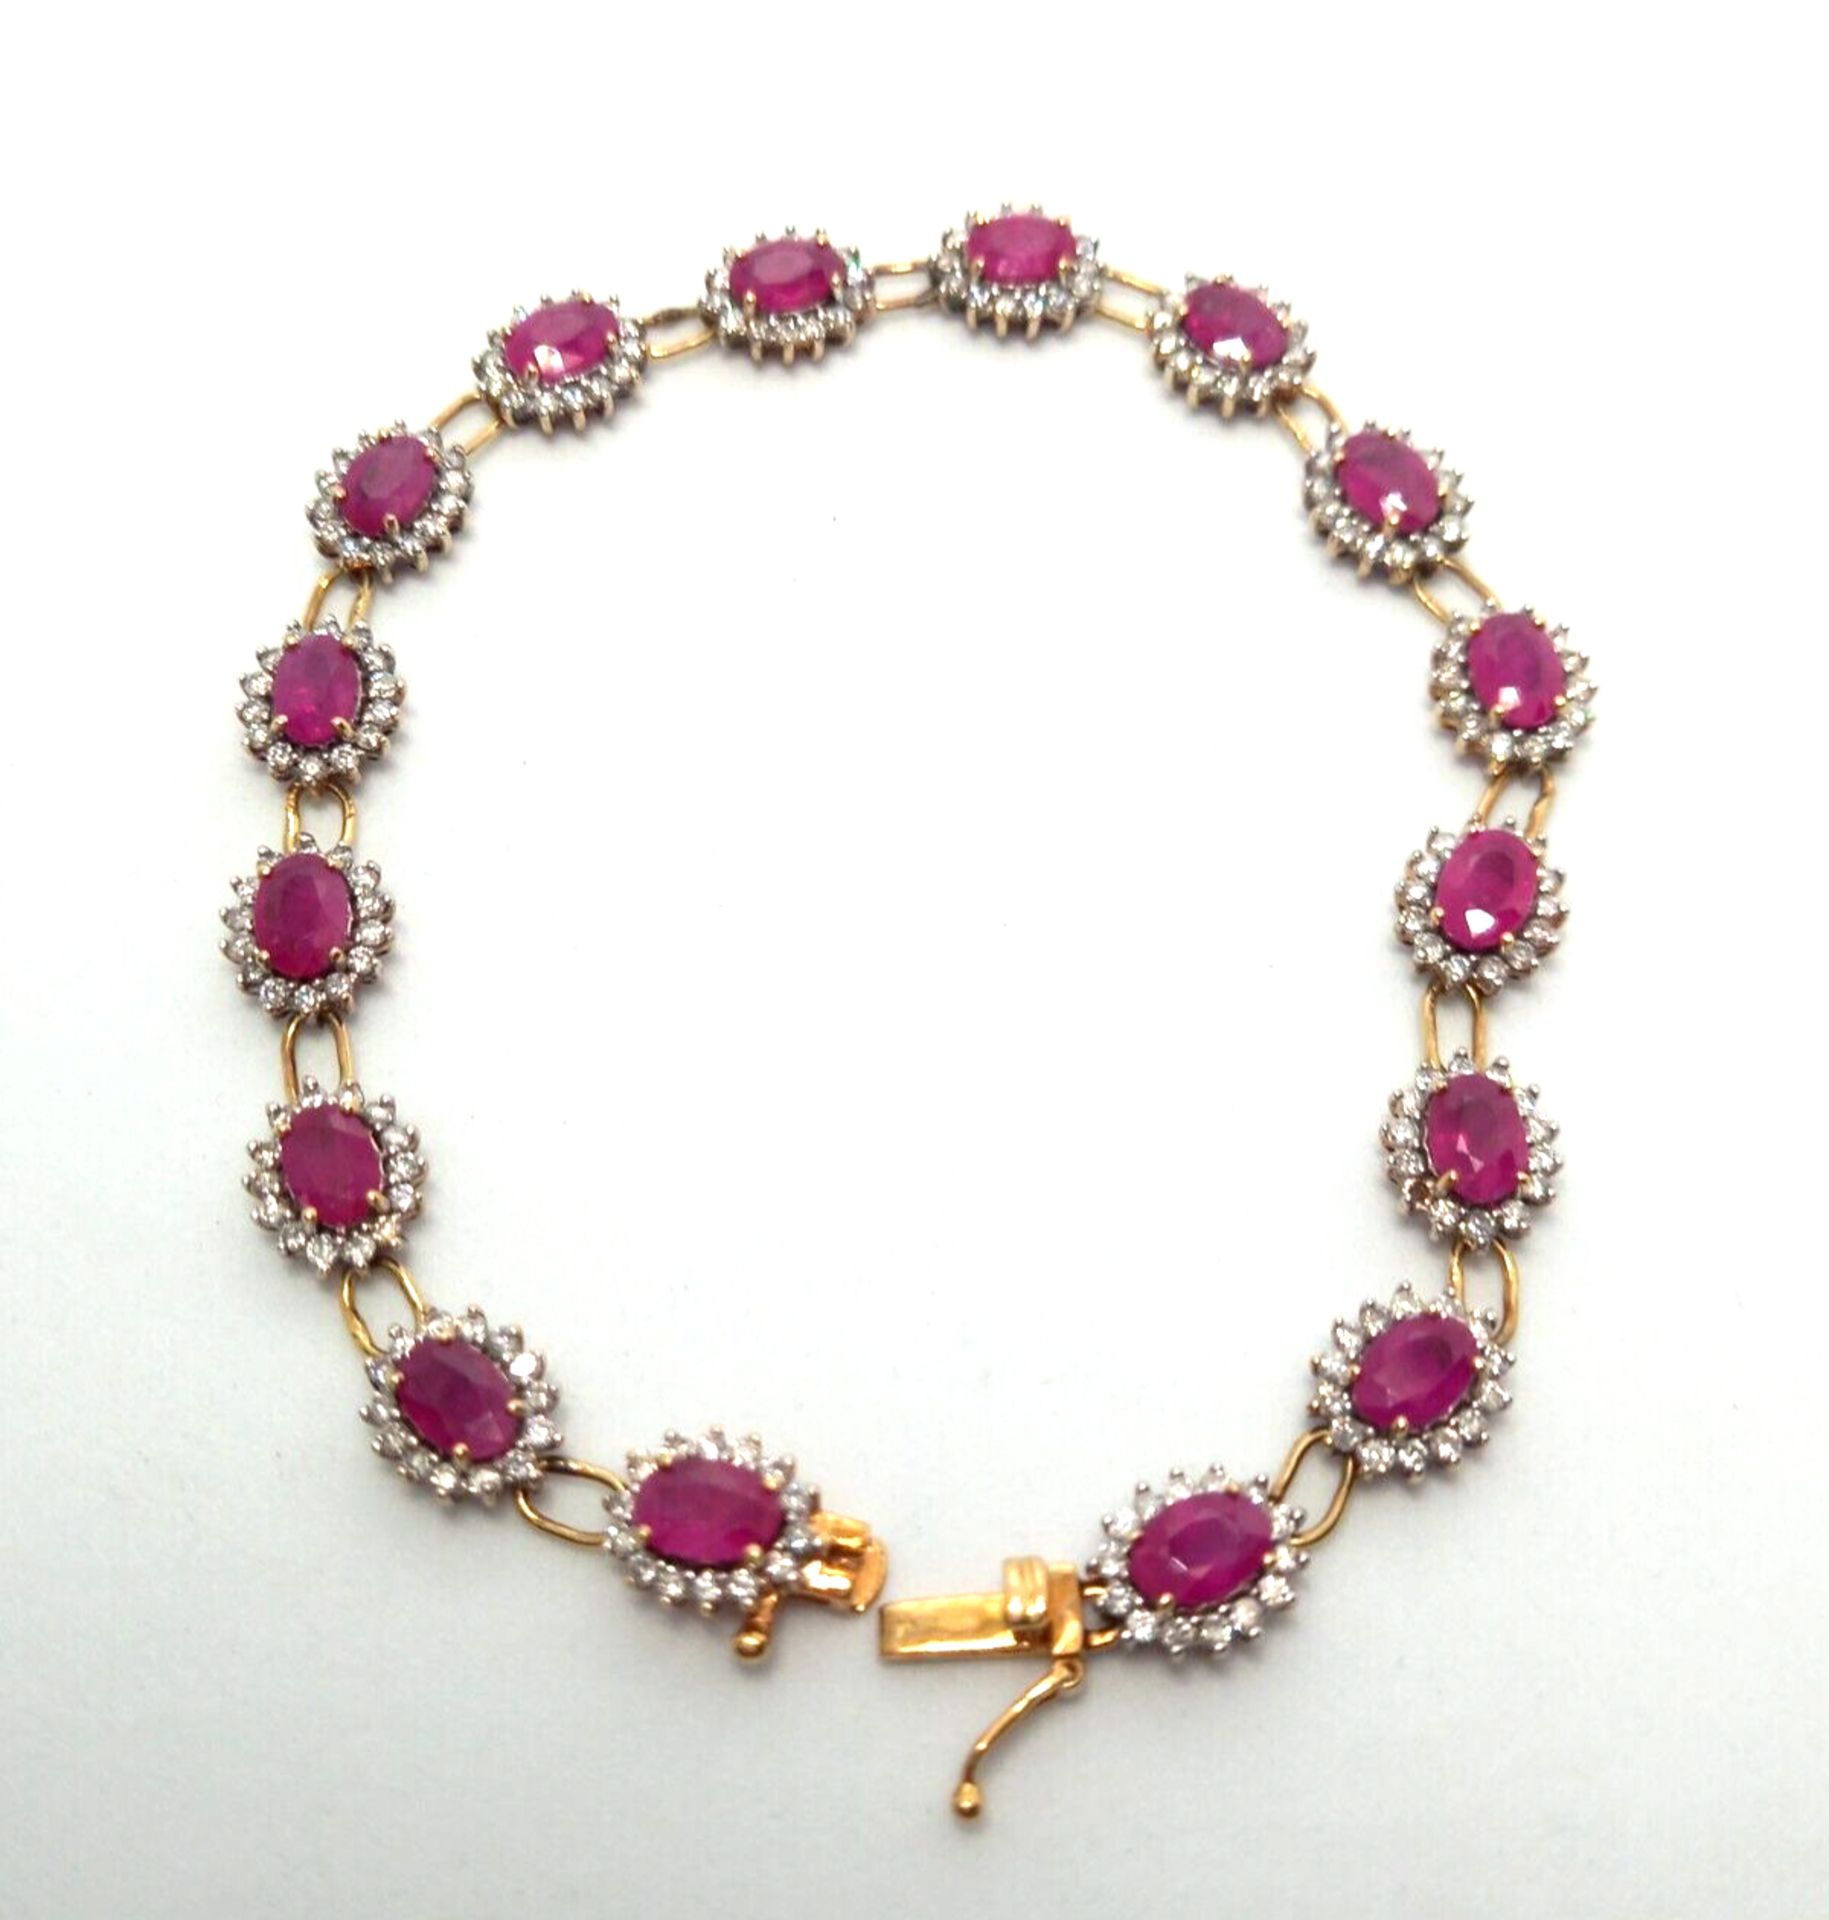 8CT RUBY 2.25CT DIAMOND BRACELET 18CT YELLOW GOLD WITH GIFT BOX AND VALUATION CERTIFICATE OF £4900 - Image 6 of 6